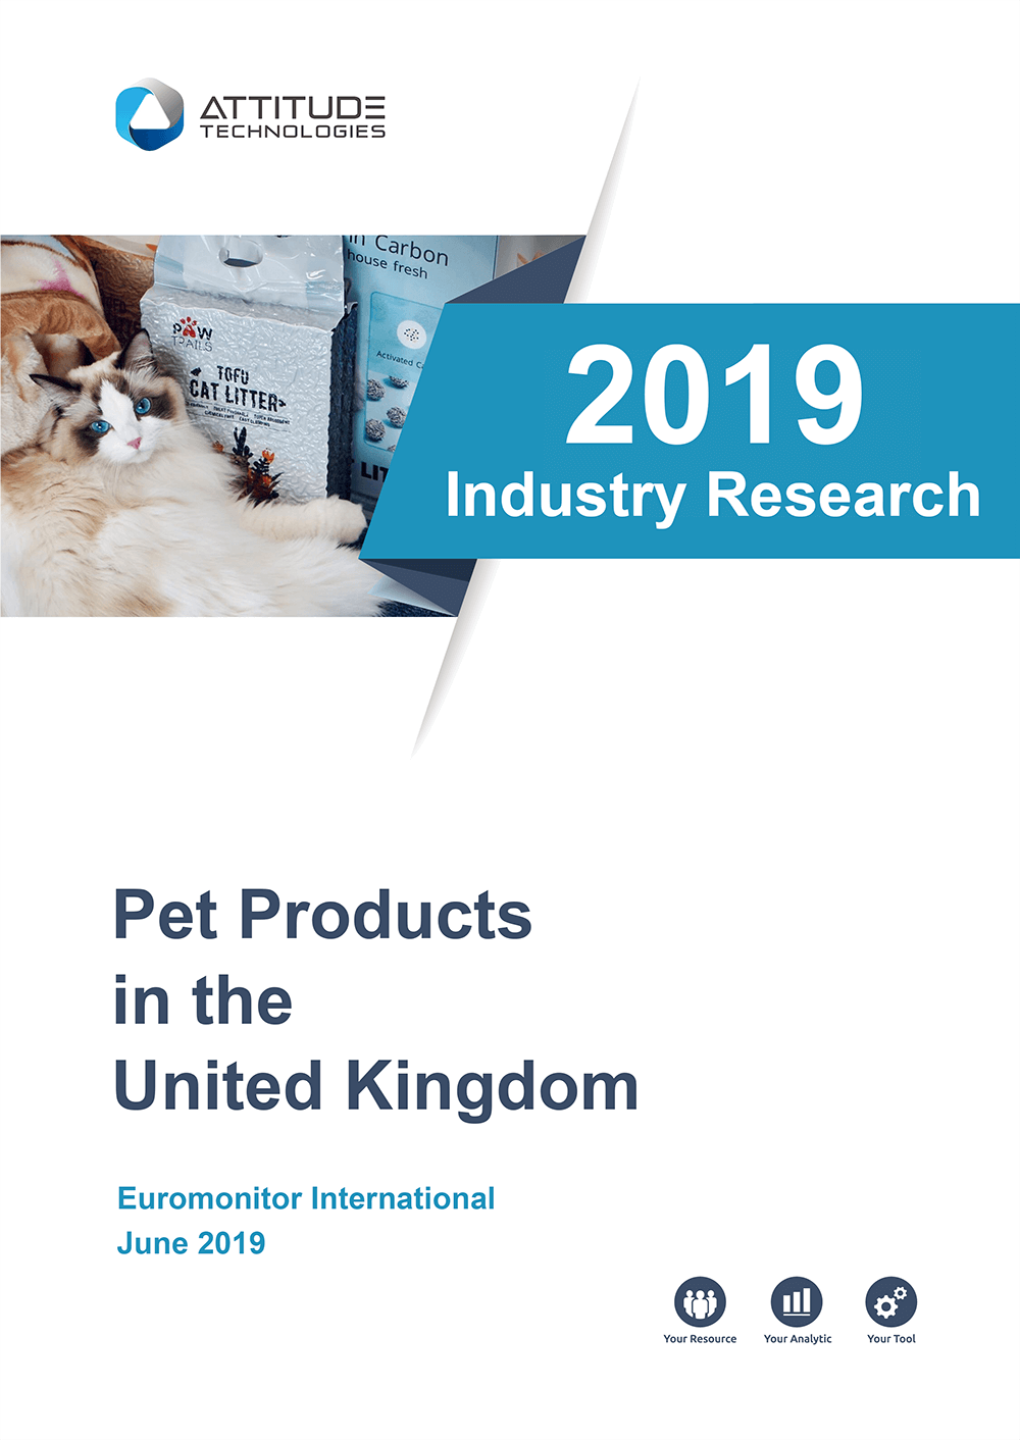 PET PRODUCTS in the UNITED KINGDOM P a S S P O R T I